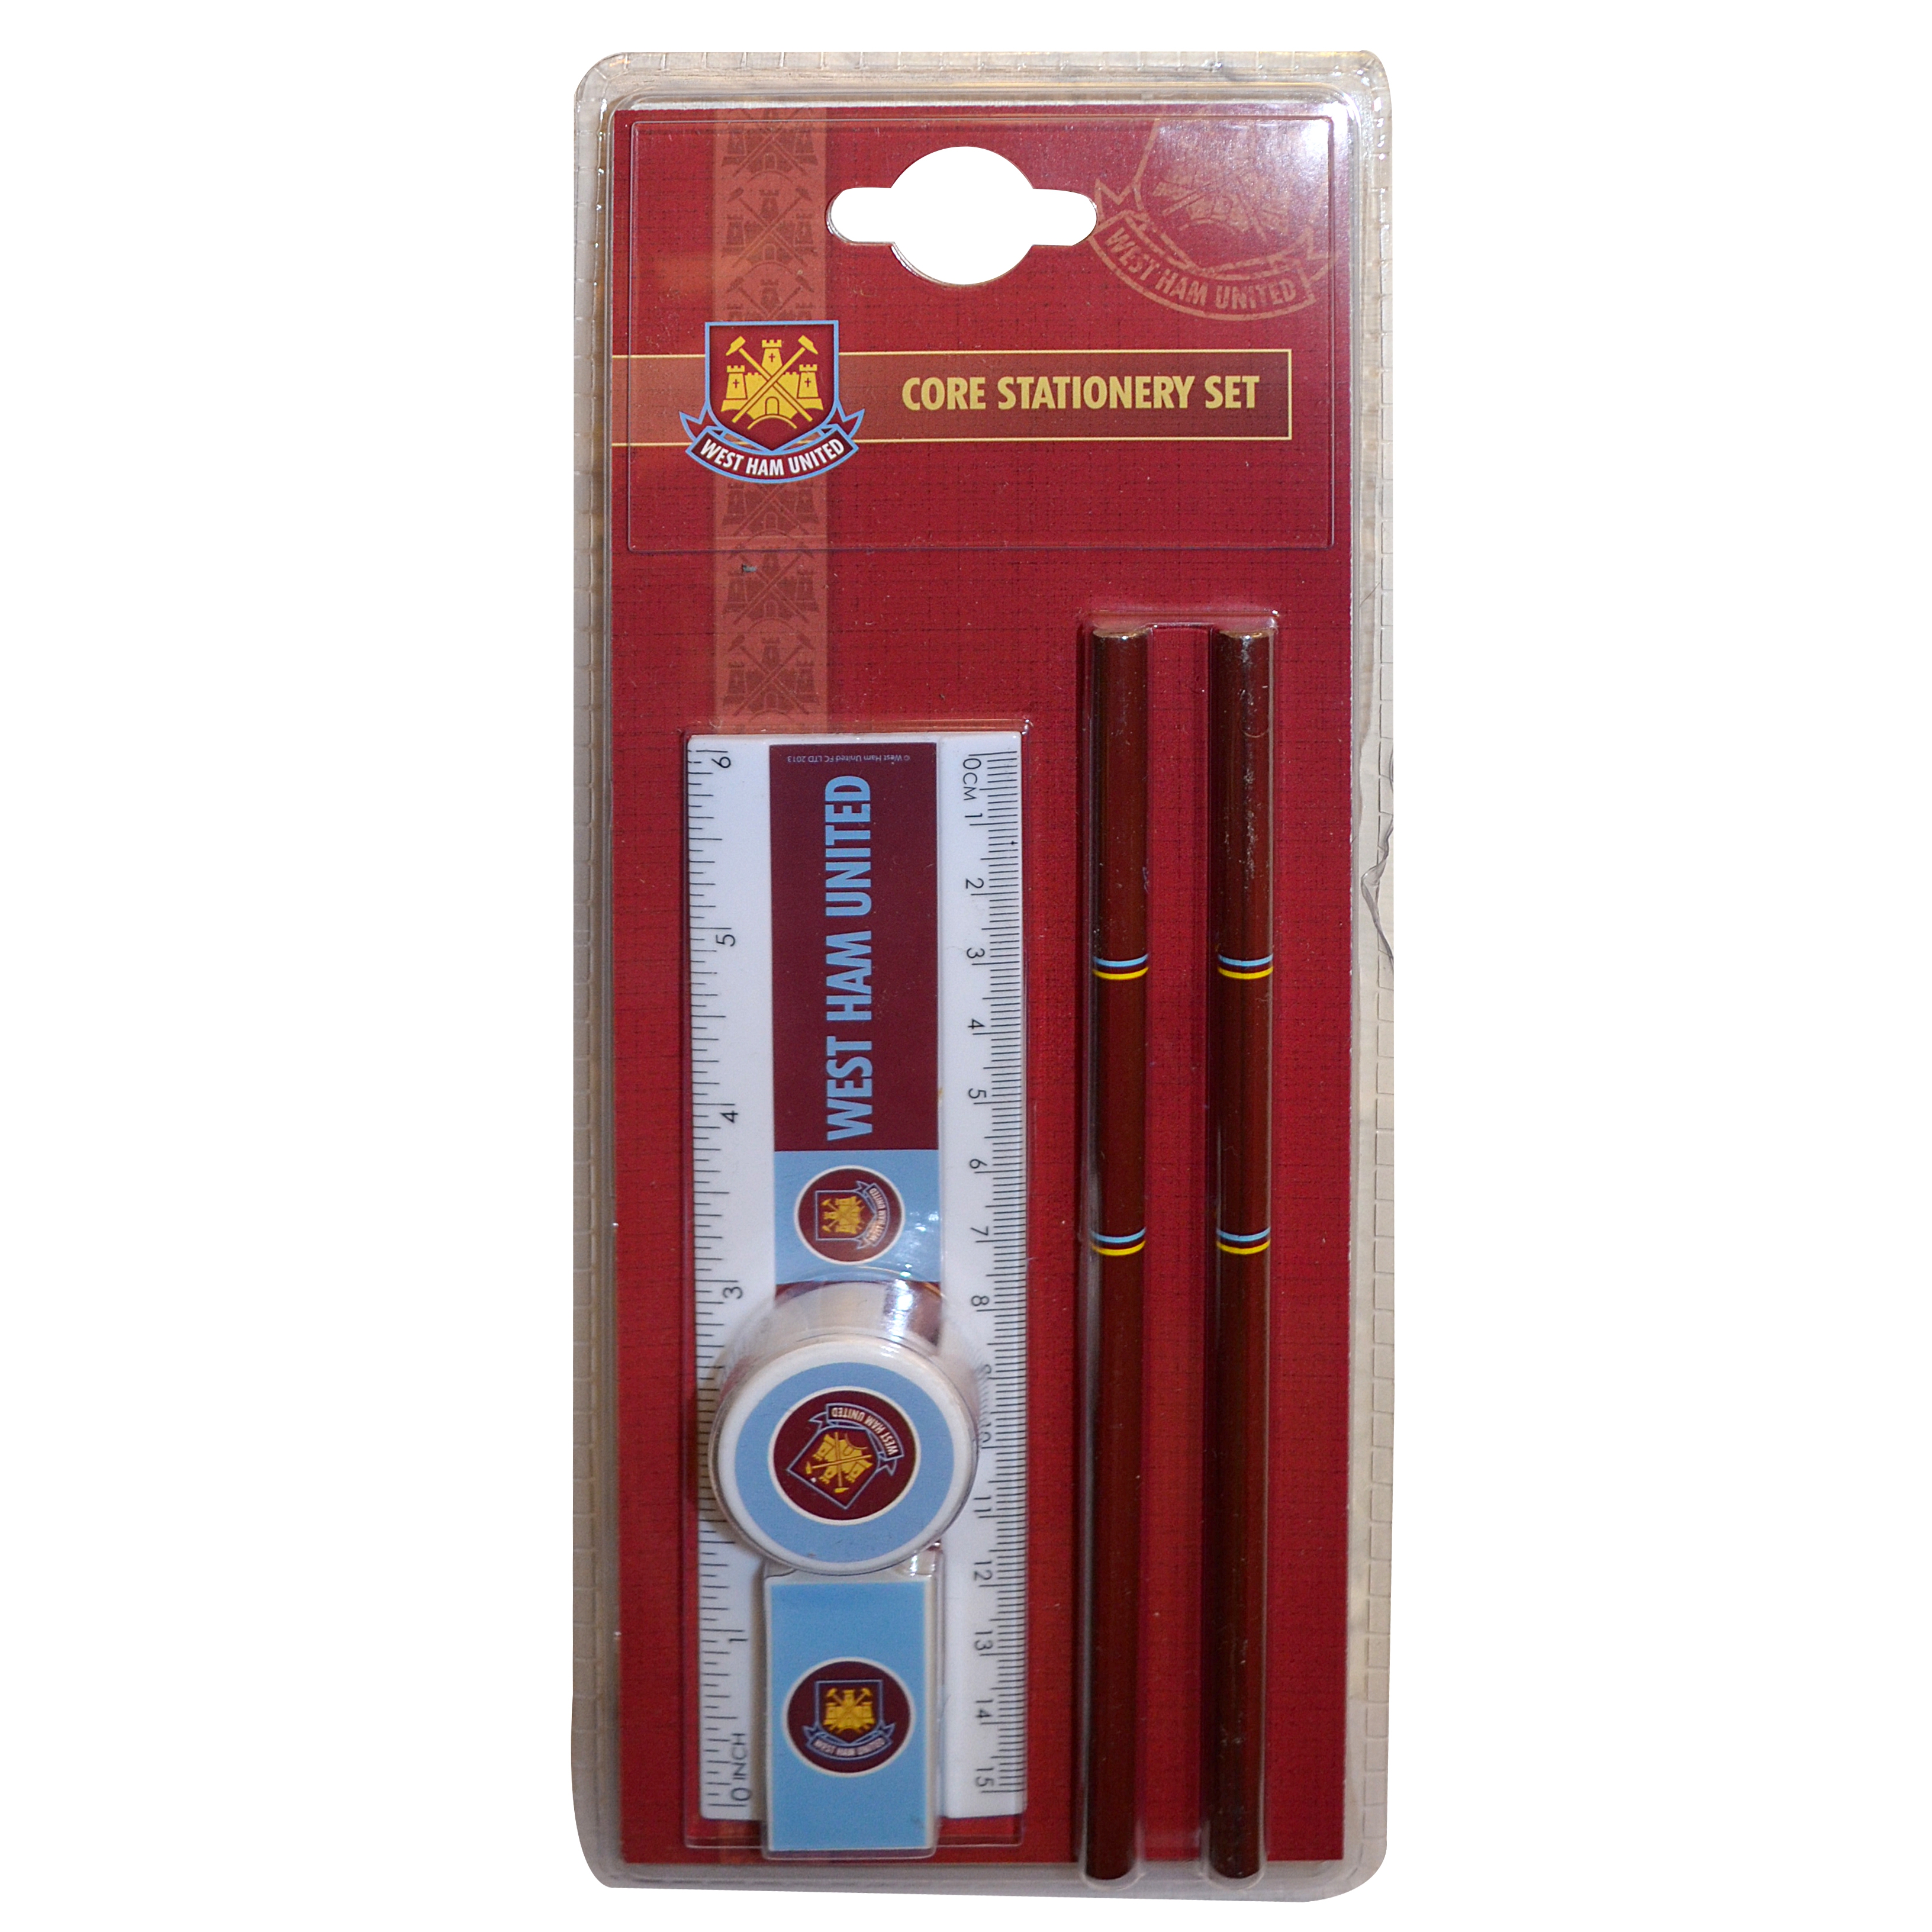 West Ham United Fc 'Core' Stationery Set Football Official